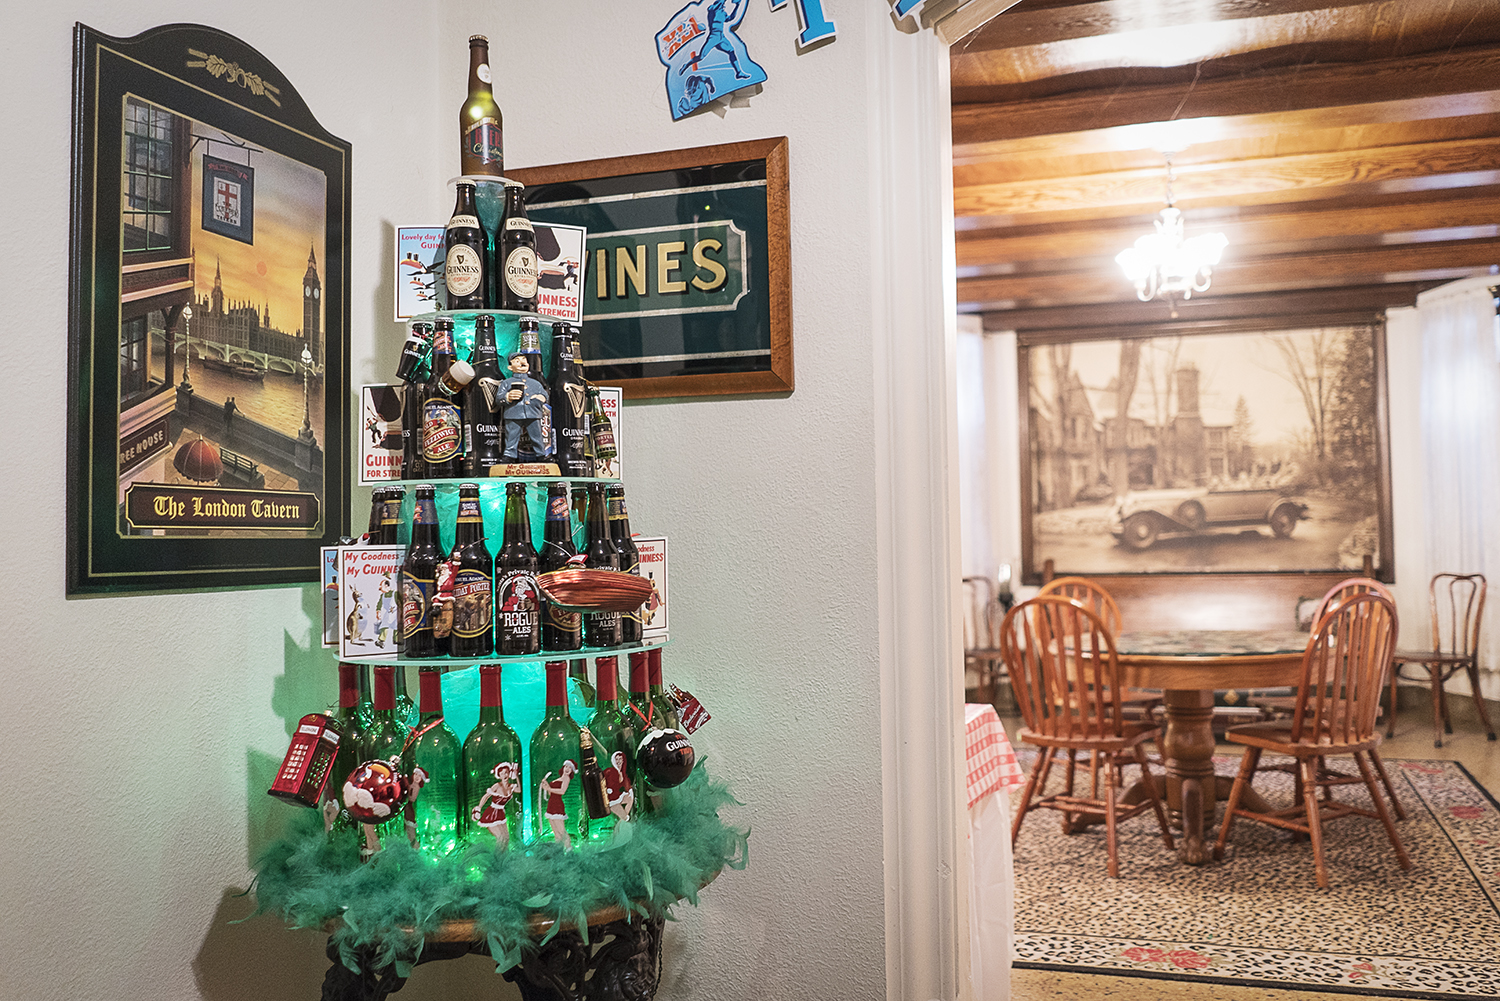 A Christmas tree made of beer bottles stands in a corner of the basement pub in the Heddy home.